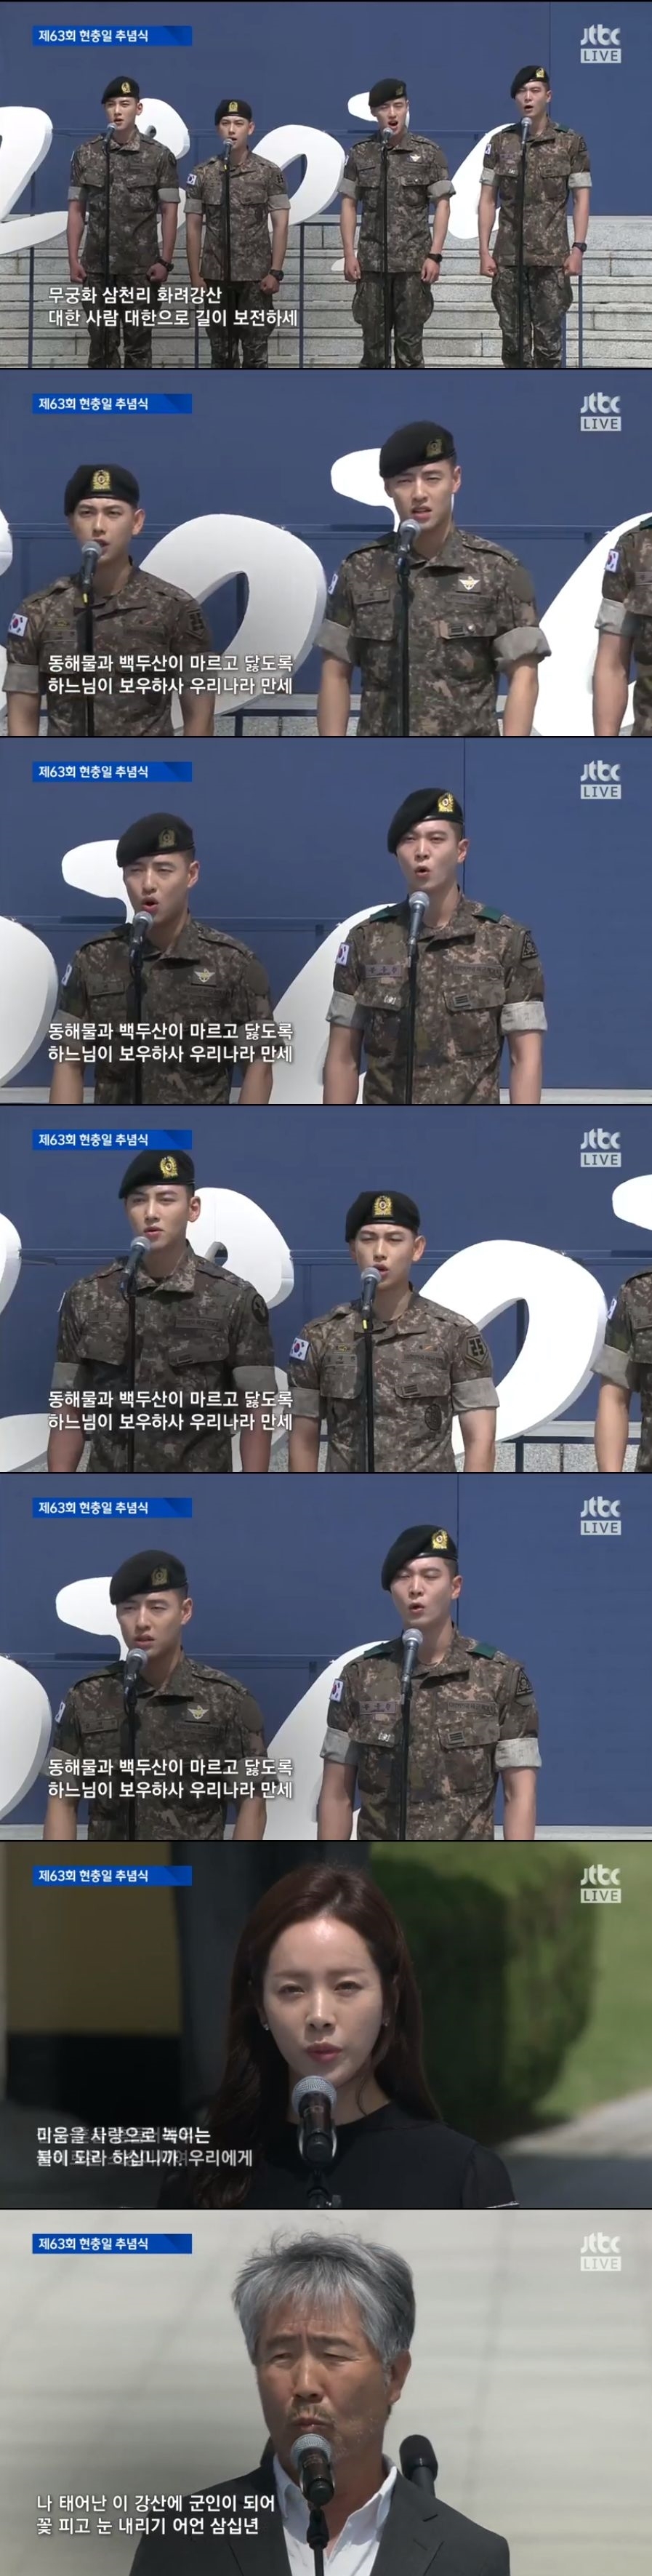 Seoul =) = Celebrities including actors Ji Chang-wook (31), Siwan (30), Kang Ha-neul (28), Joo Won (31) and Han Ji-min (36), and Choi Baek-ho (68) in military service led the 63rd Memorial Day memorial service.The 63rd Memorial Day memorial ceremony held at the National Daejeon Civic Center on the morning of the 6th was a surprise star.The first to be caught on a memorial camera are youth stars who joined last year, including Ji Chang-wook, Siwan, Kang Ha-neul and Joo Won.They appeared in military uniforms at the beginning of the memorial service and were responsible for the national anthem, and all four of them appeared in musicals or singers, and their singing skills were outstanding.Following them, actor Han Ji-min read a memorial tribute.He read the book Let us all be green peace by Sister Lee Hae-in, and he delivered the contents of the poem with accurate pronunciation and restrained emotion.In addition, singer Choi Baek-ho sang The Song of an Old Soldier and comforted the soul of the patriotic line.On the other hand, it is only 19 years since 1999 that the Memorial Day memorial ceremony was held at Daejeon Civic Center.The theme of this memorial ceremony is 428030, I remember you in the name of the Republic of Korea, and 428030 is the sum of all 10 national cemetery saddles.